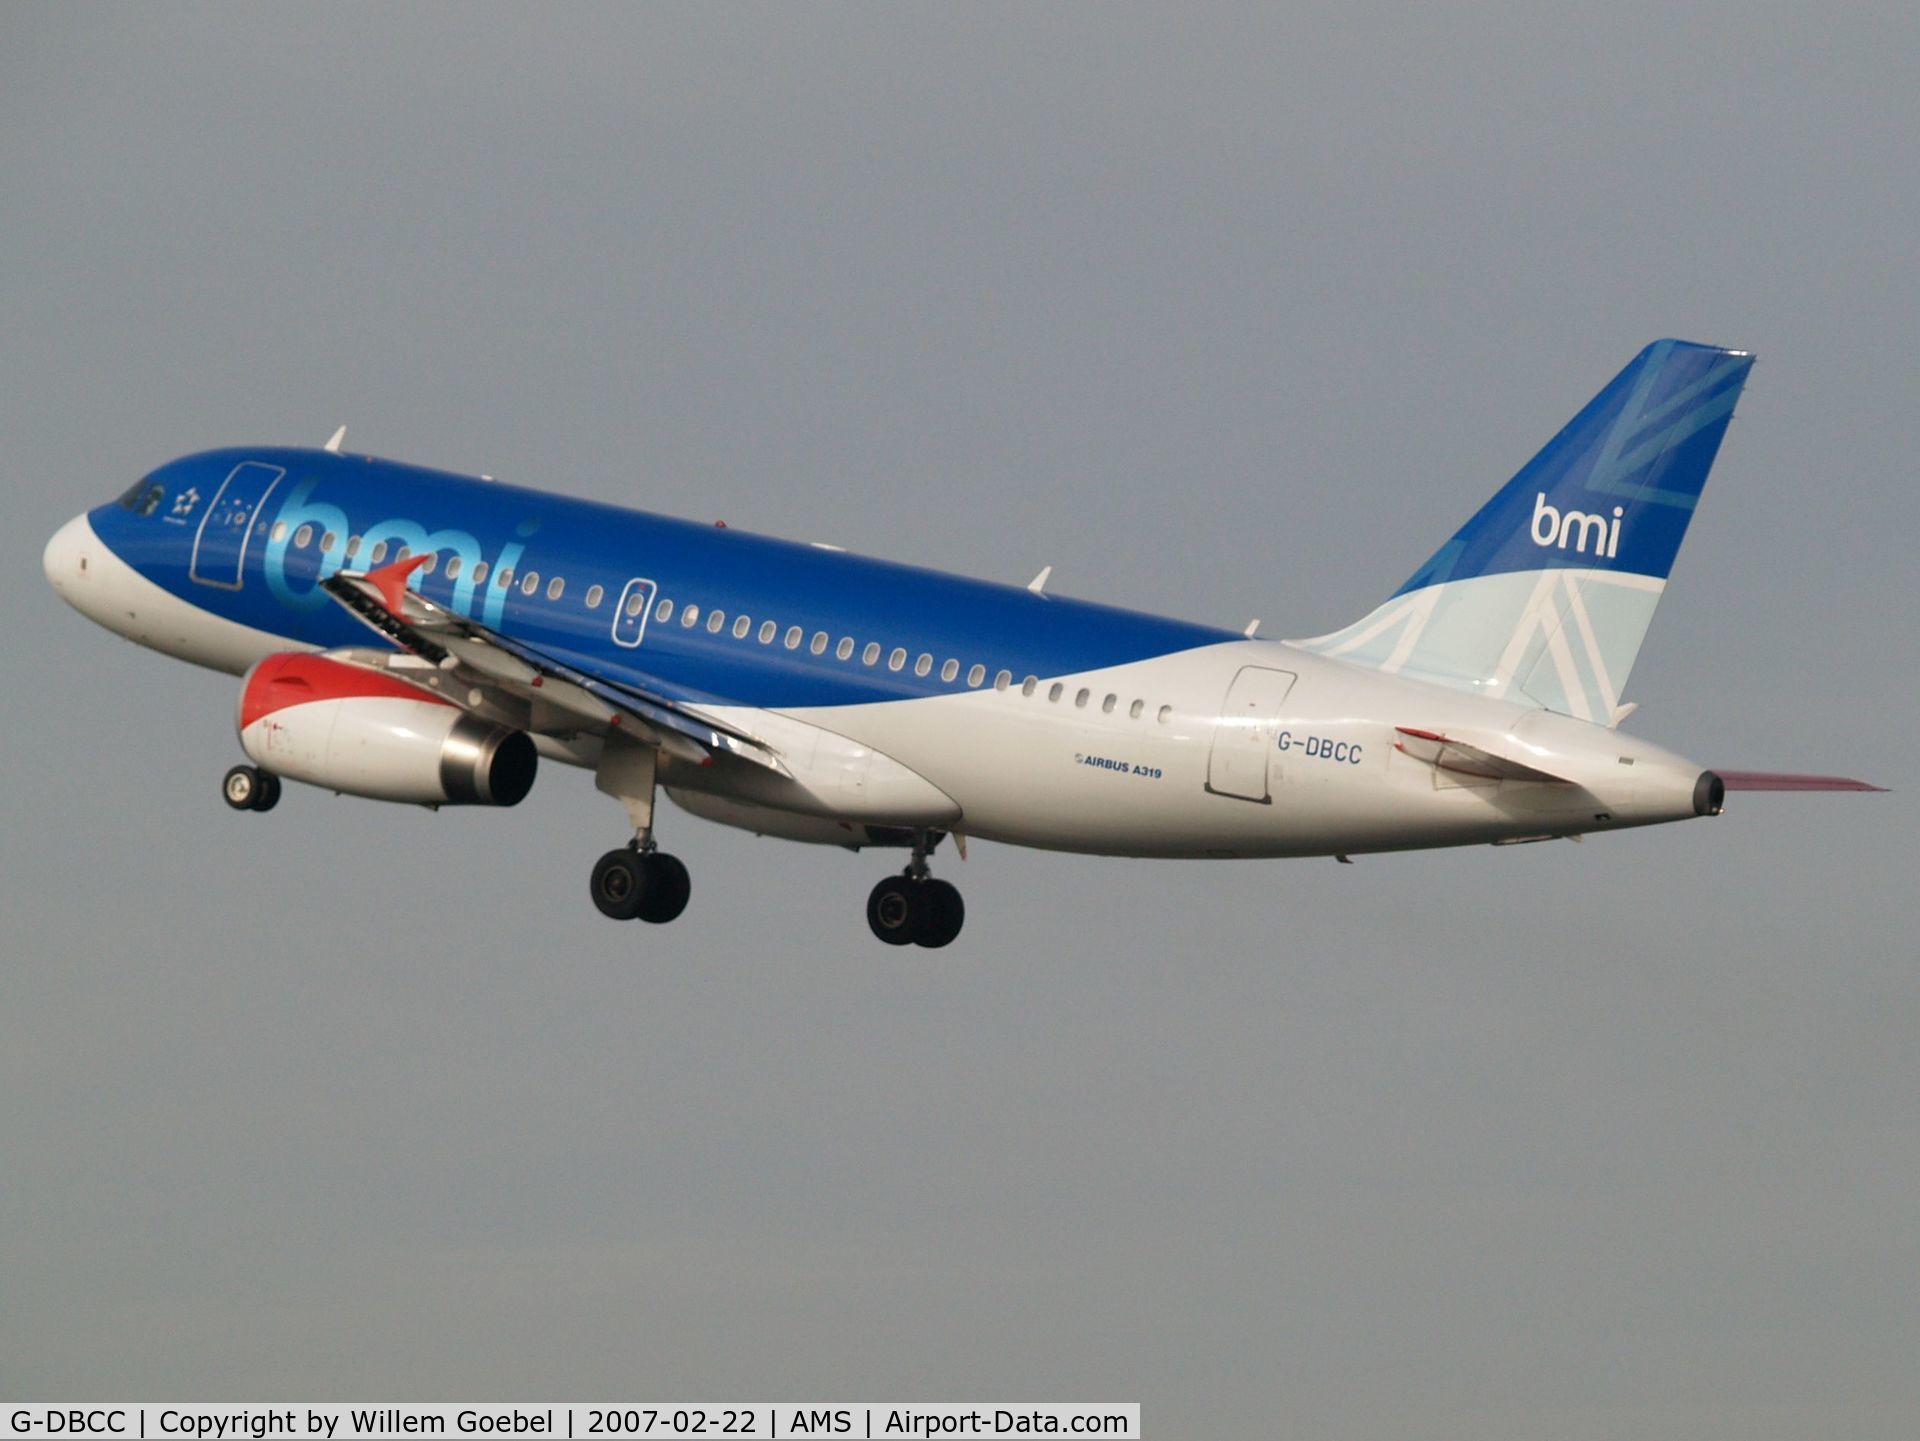 G-DBCC, 2004 Airbus A319-131 C/N 2194, Take off from Amsterdam Airport of runway 24